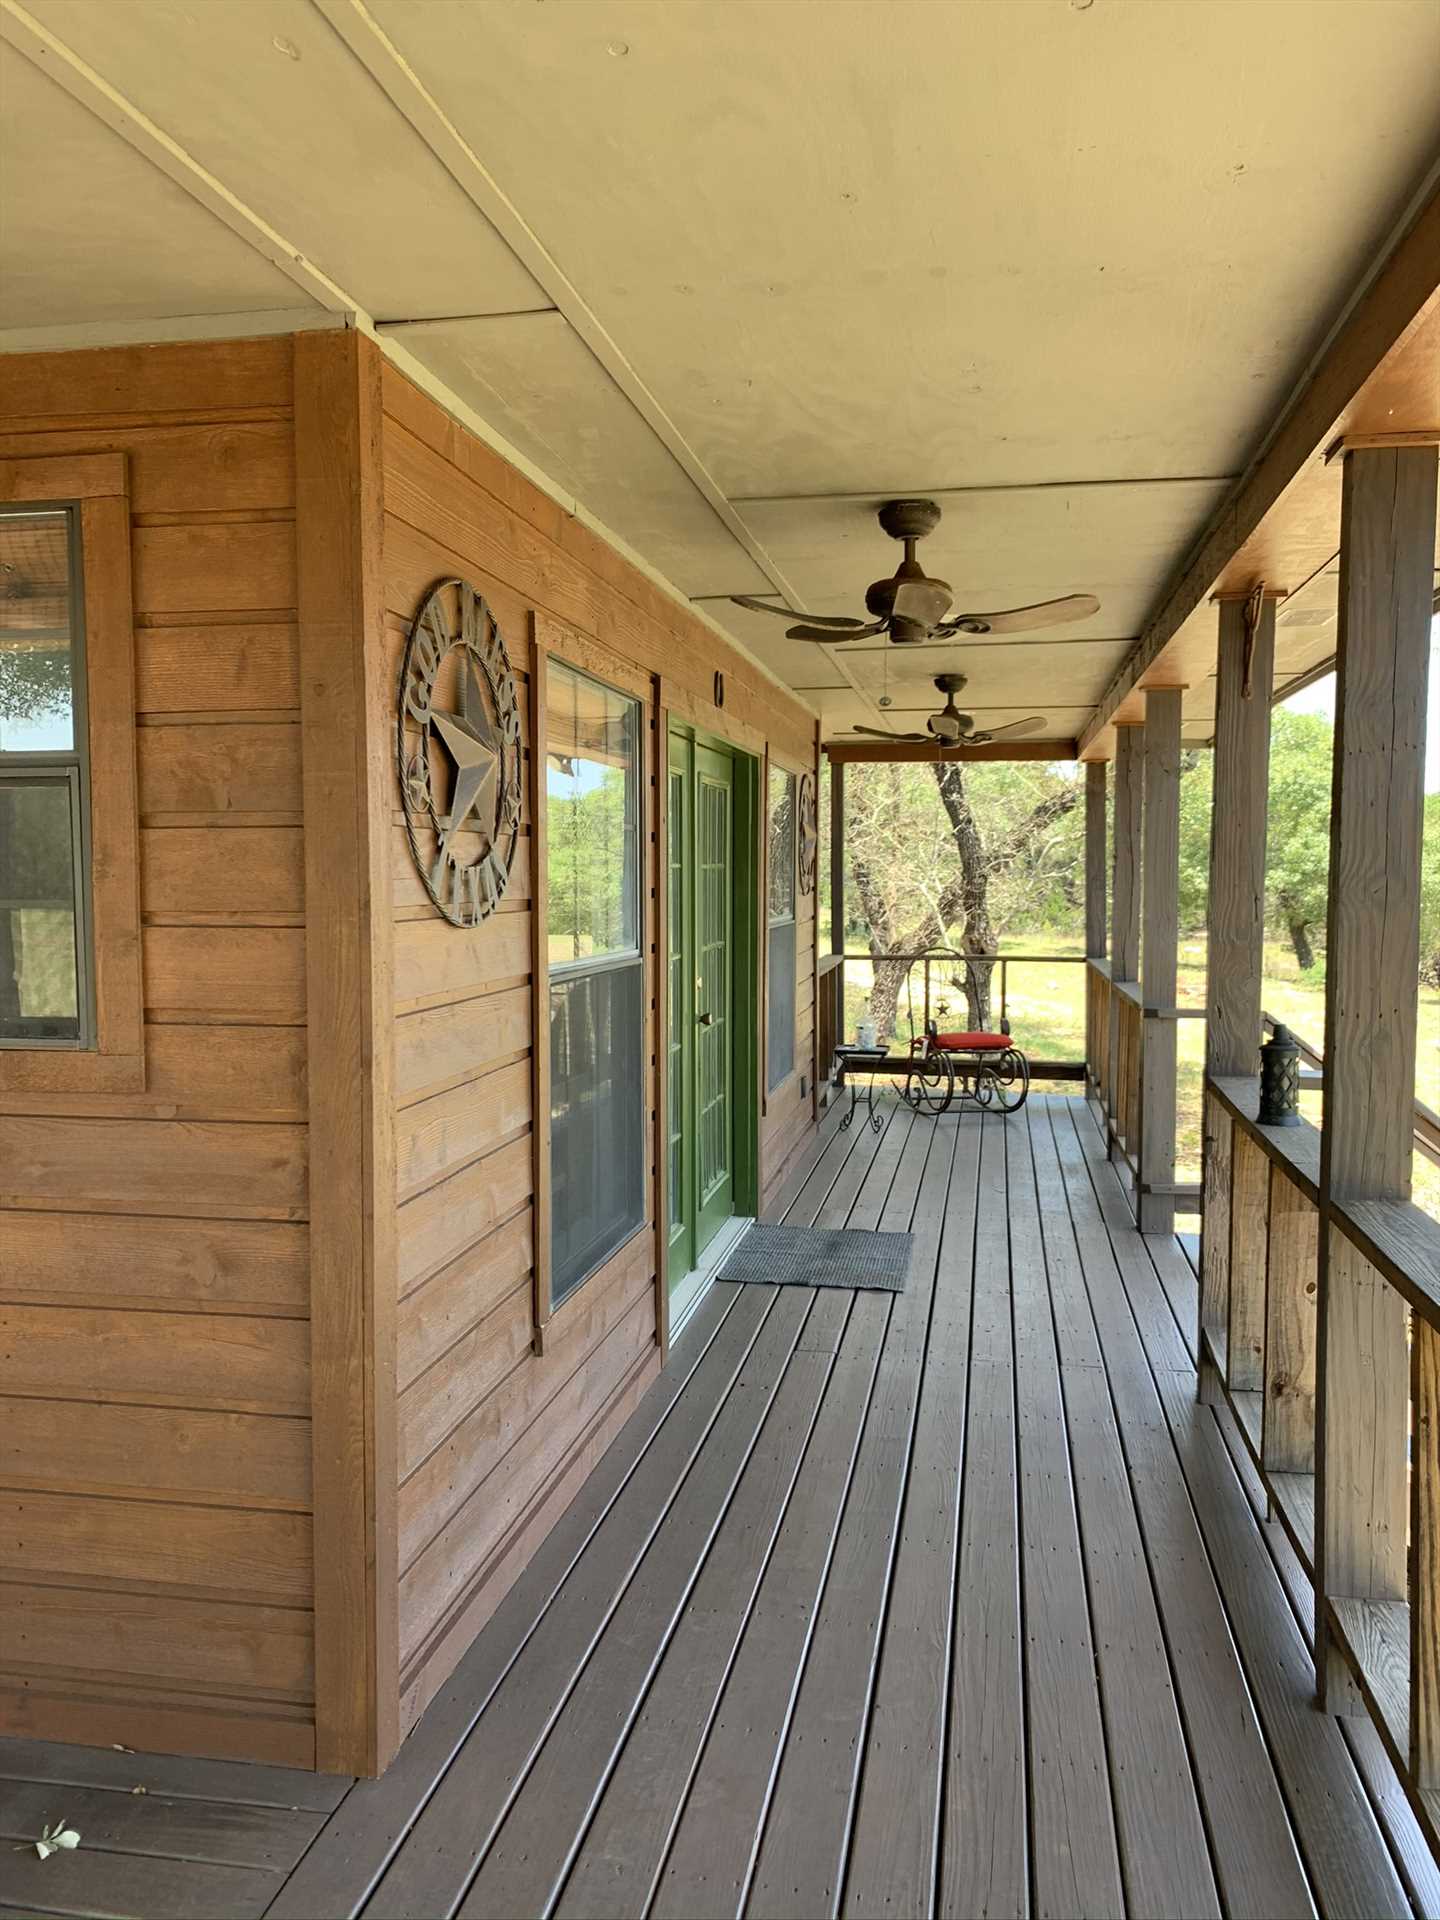                                                 The huge porch at the Hideout provides a comfortable and shaded perch for you to take in those inspiring Hill Country views.